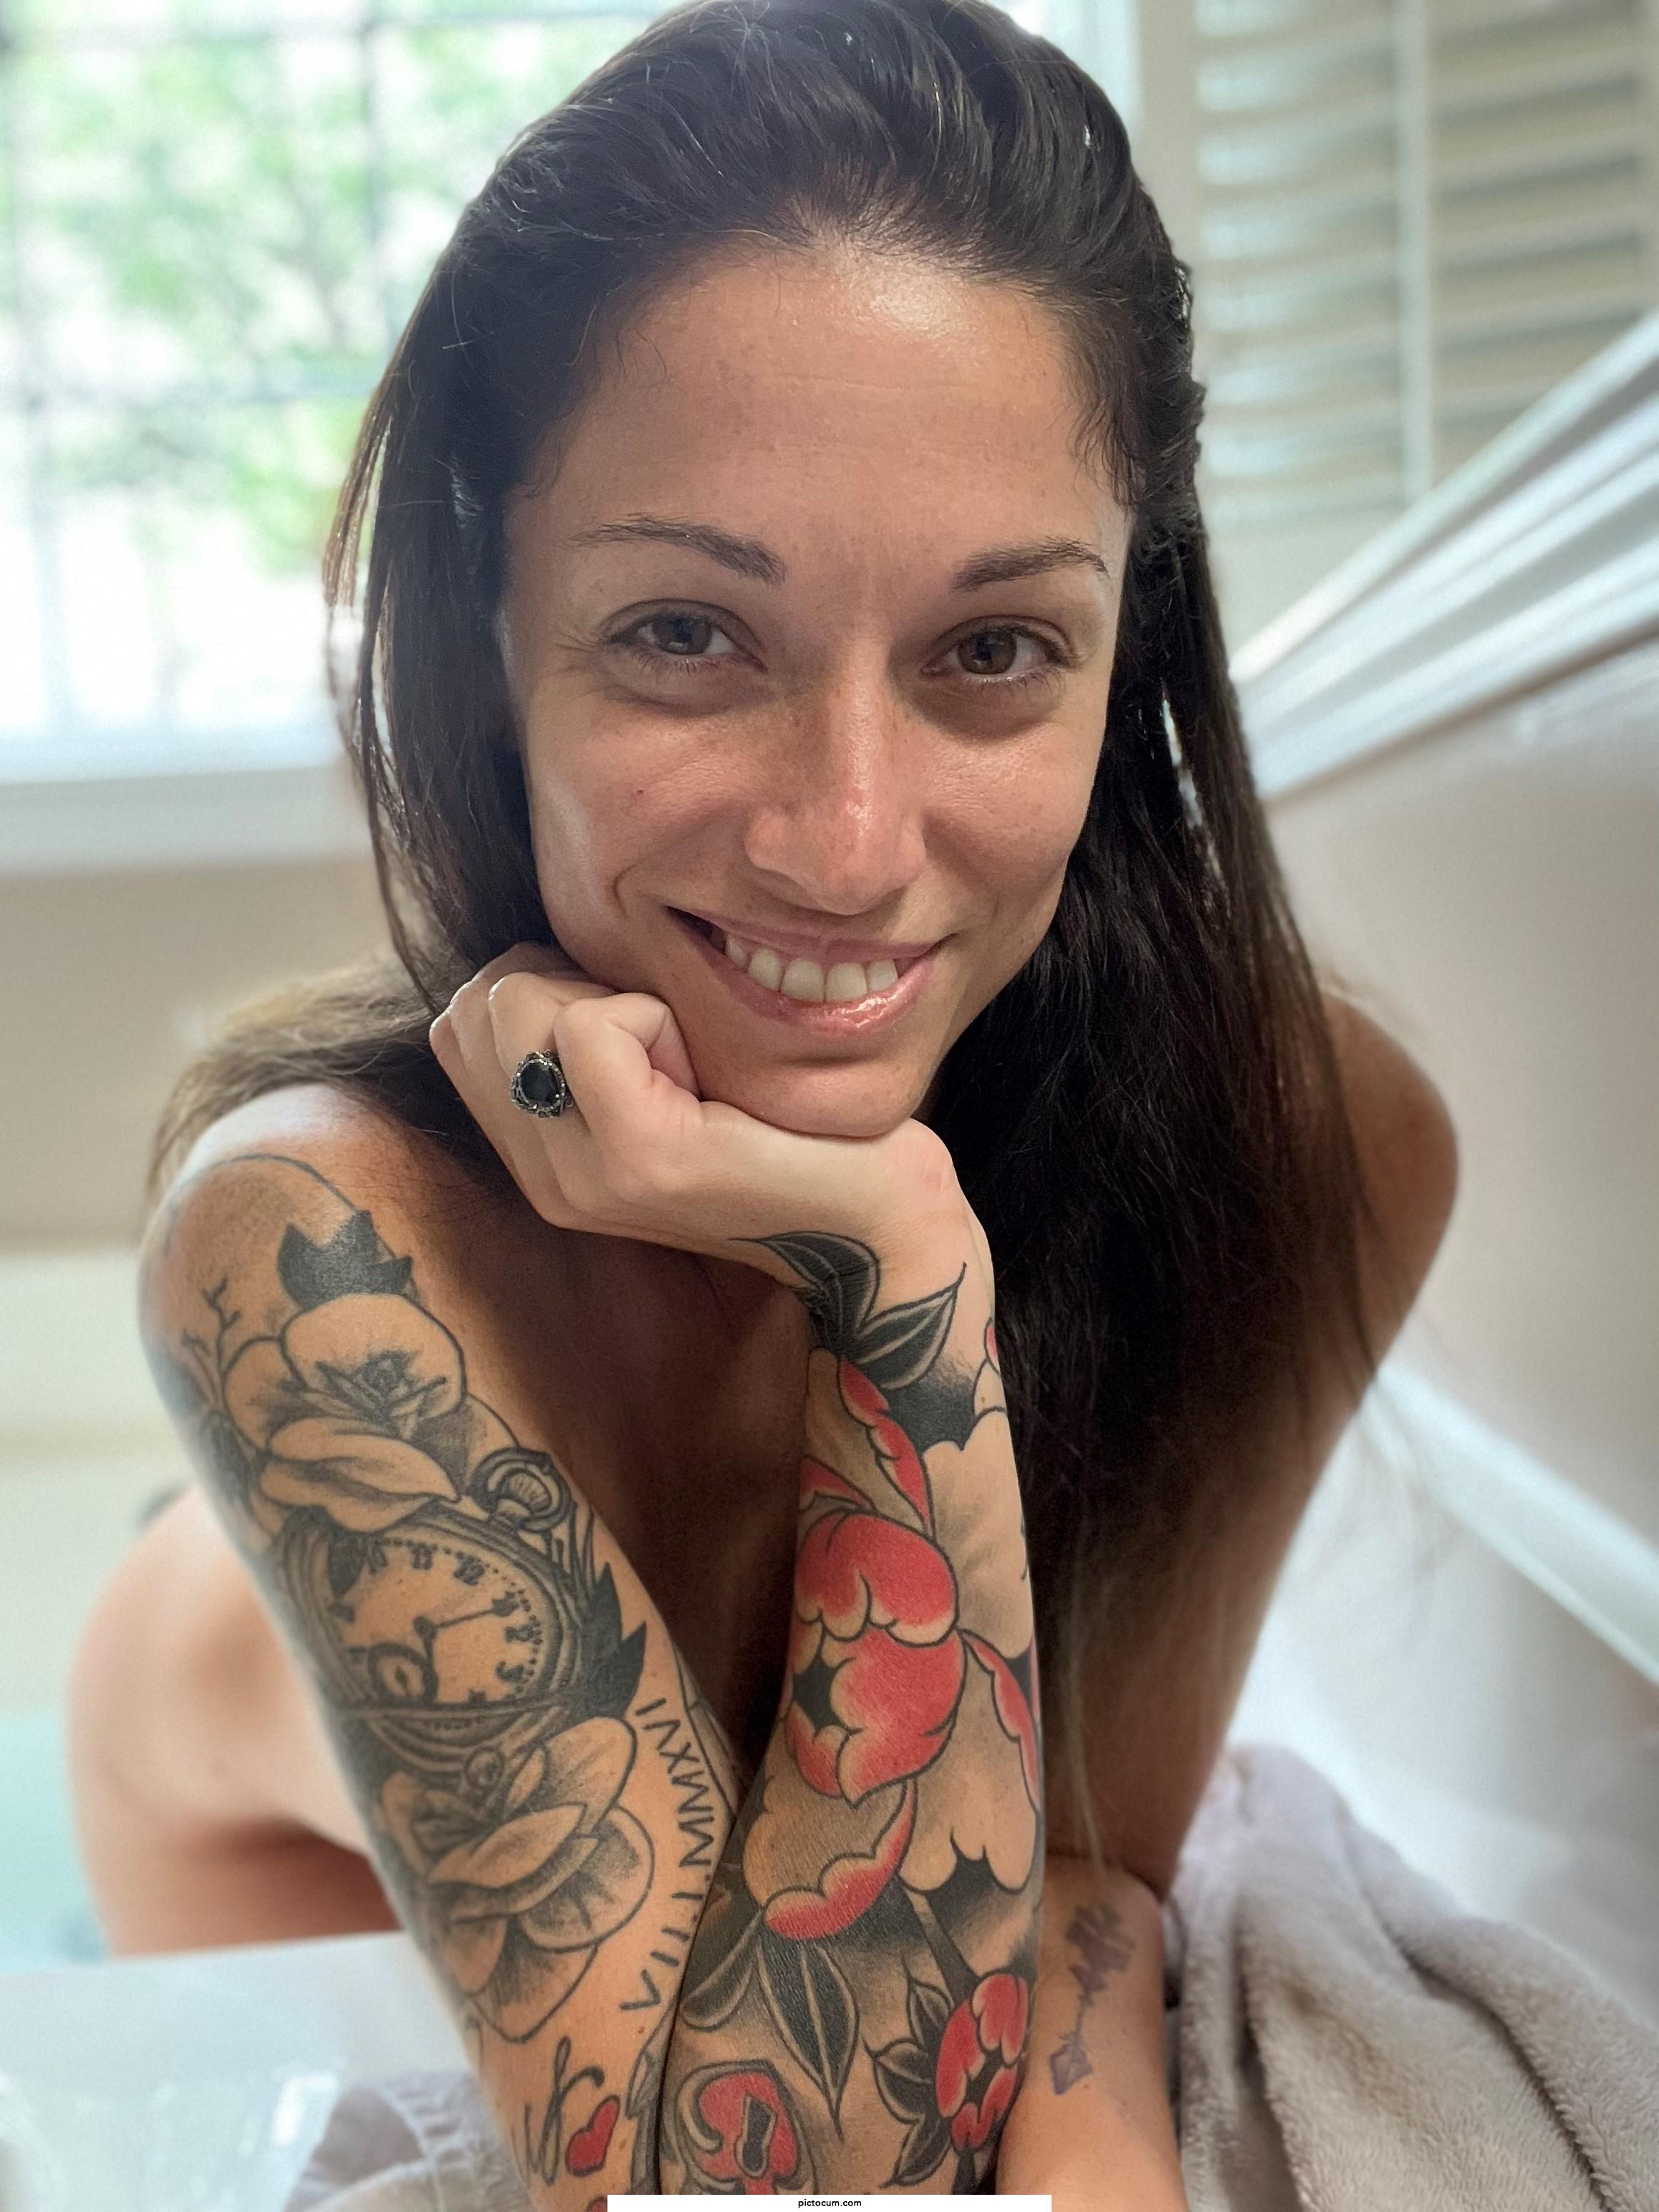 Wearing my tats, a smile and nothing else😁